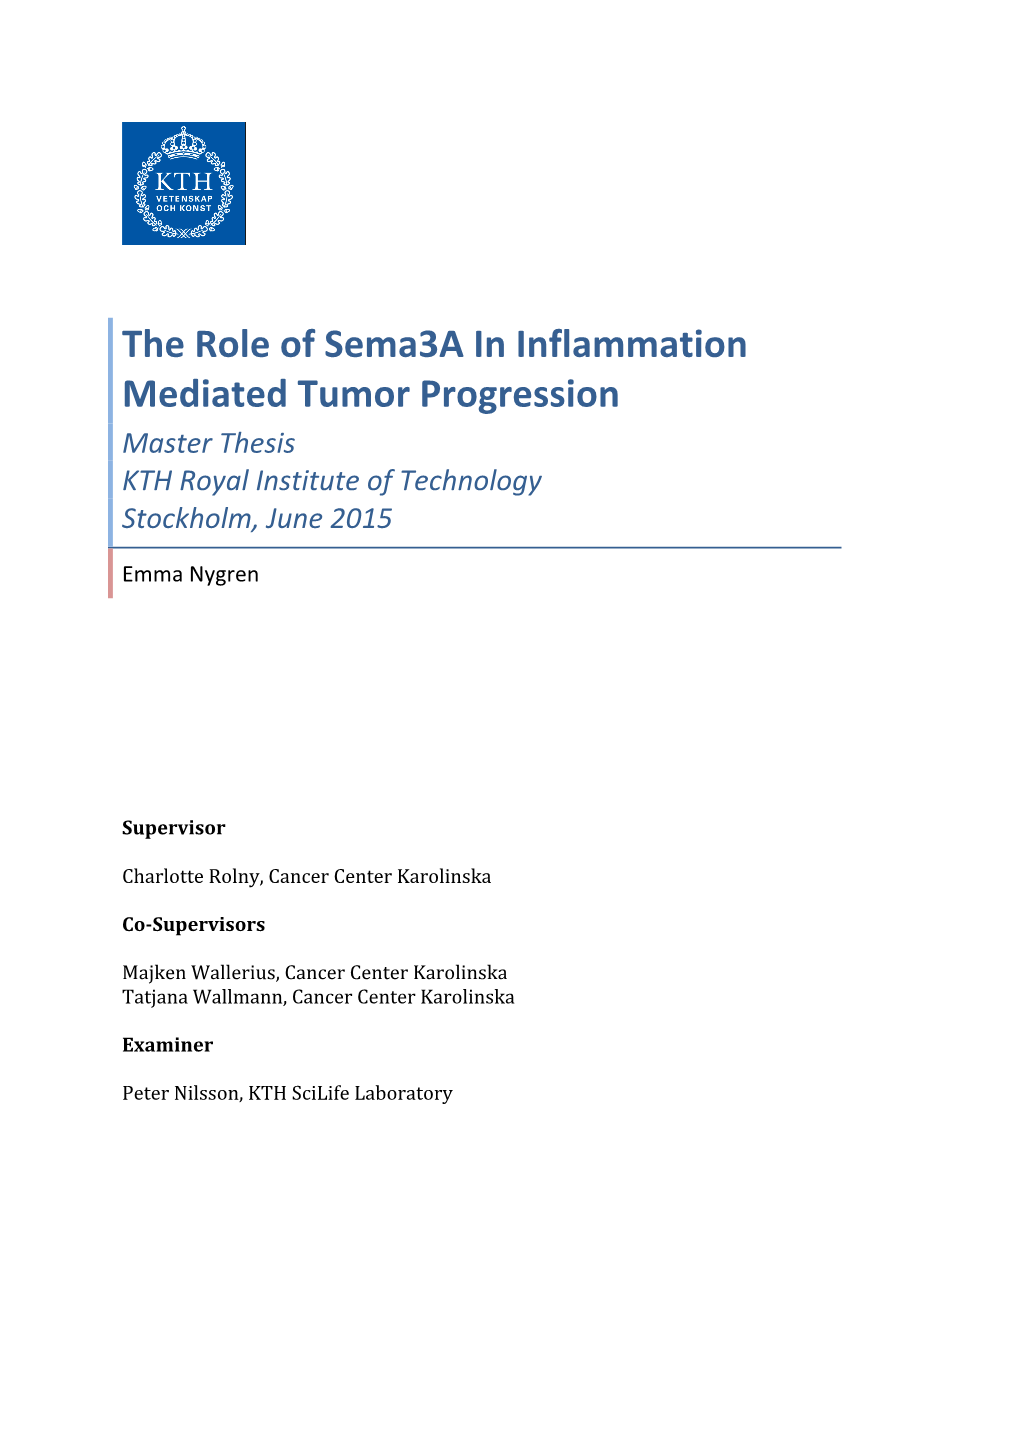 The Role of Sema3a in Inflammation Mediated Tumor Progression Master Thesis KTH Royal Institute of Technology Stockholm, June 2015